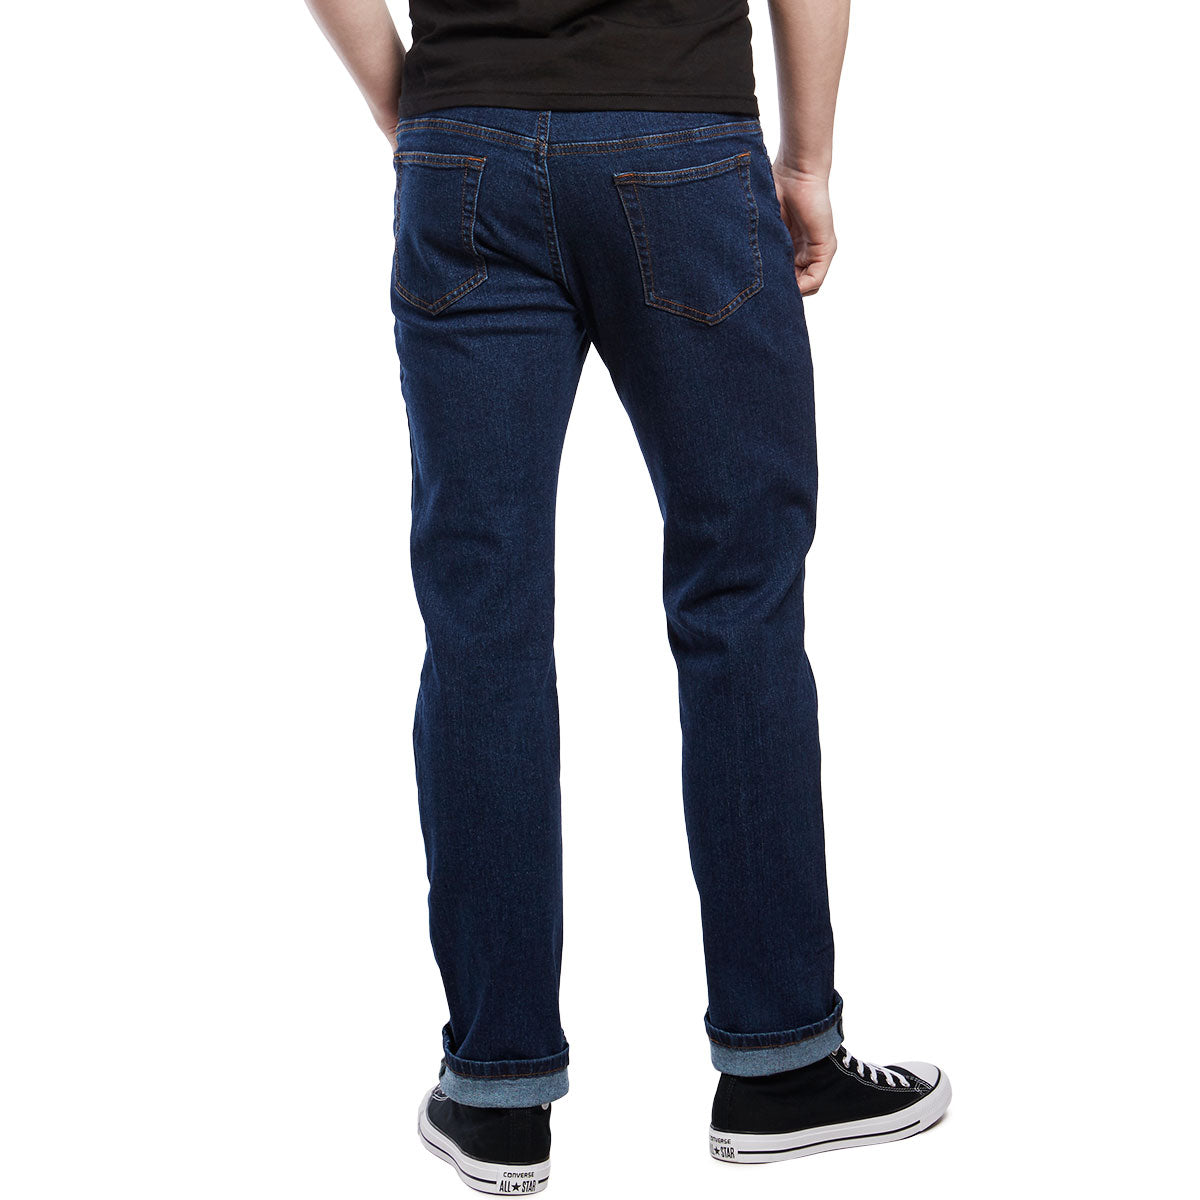 CCS Relaxed Fit Jeans - Dark Rinse image 3